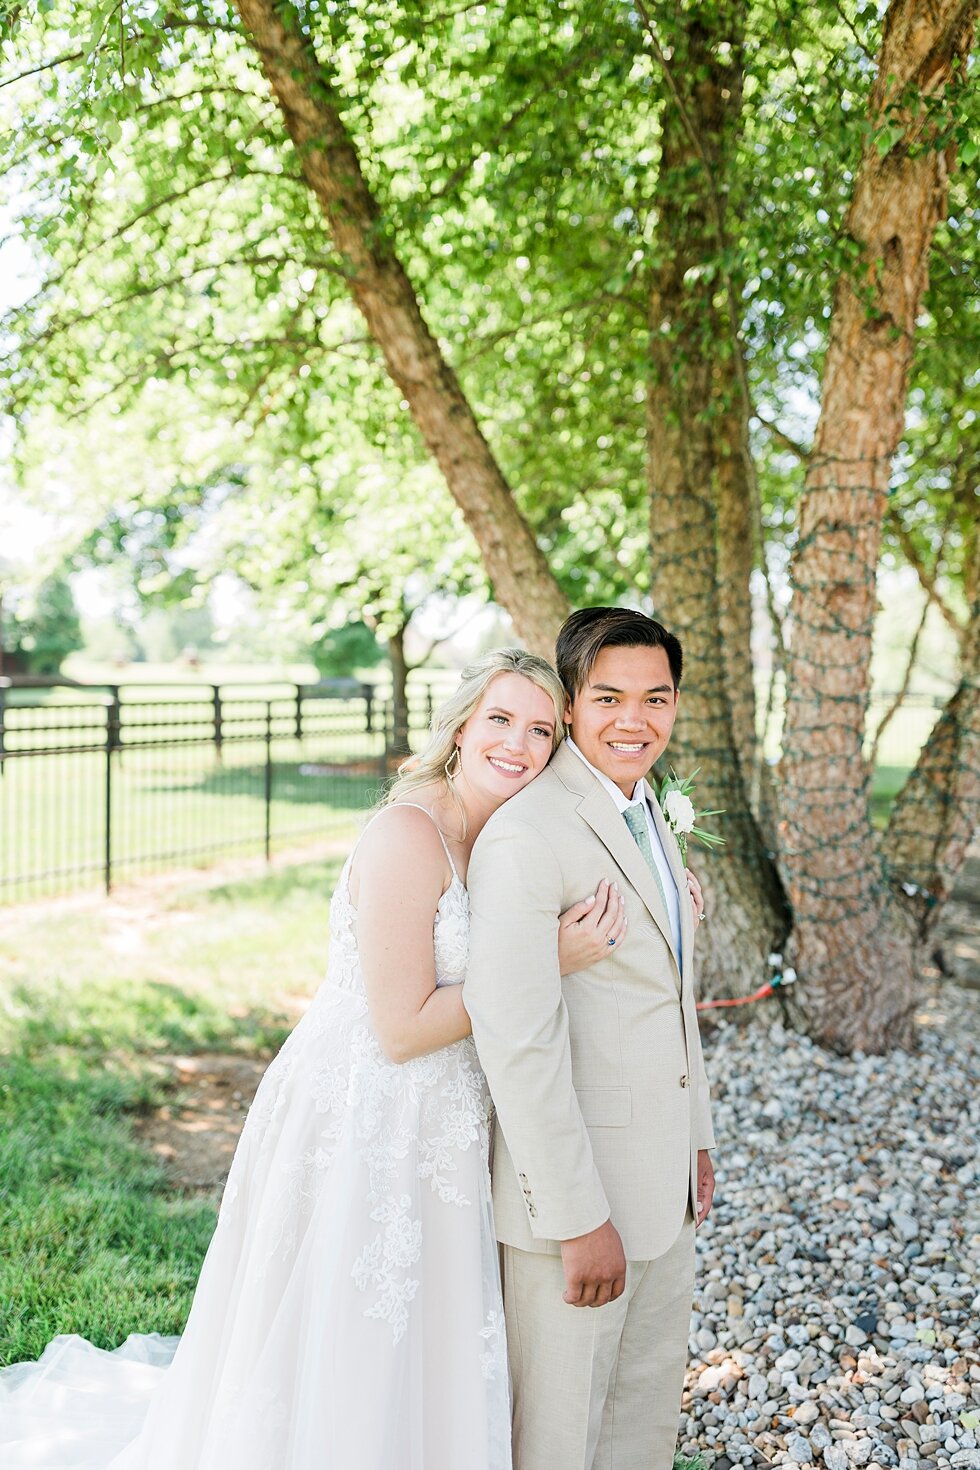  Such a wonderful couple taking portraits after they tied the knot during their romantic and intimate backyard wedding! Romantic casual lace wedding gown close friends neutral colors background wedding natural greenery crisp white #midwestphotographe